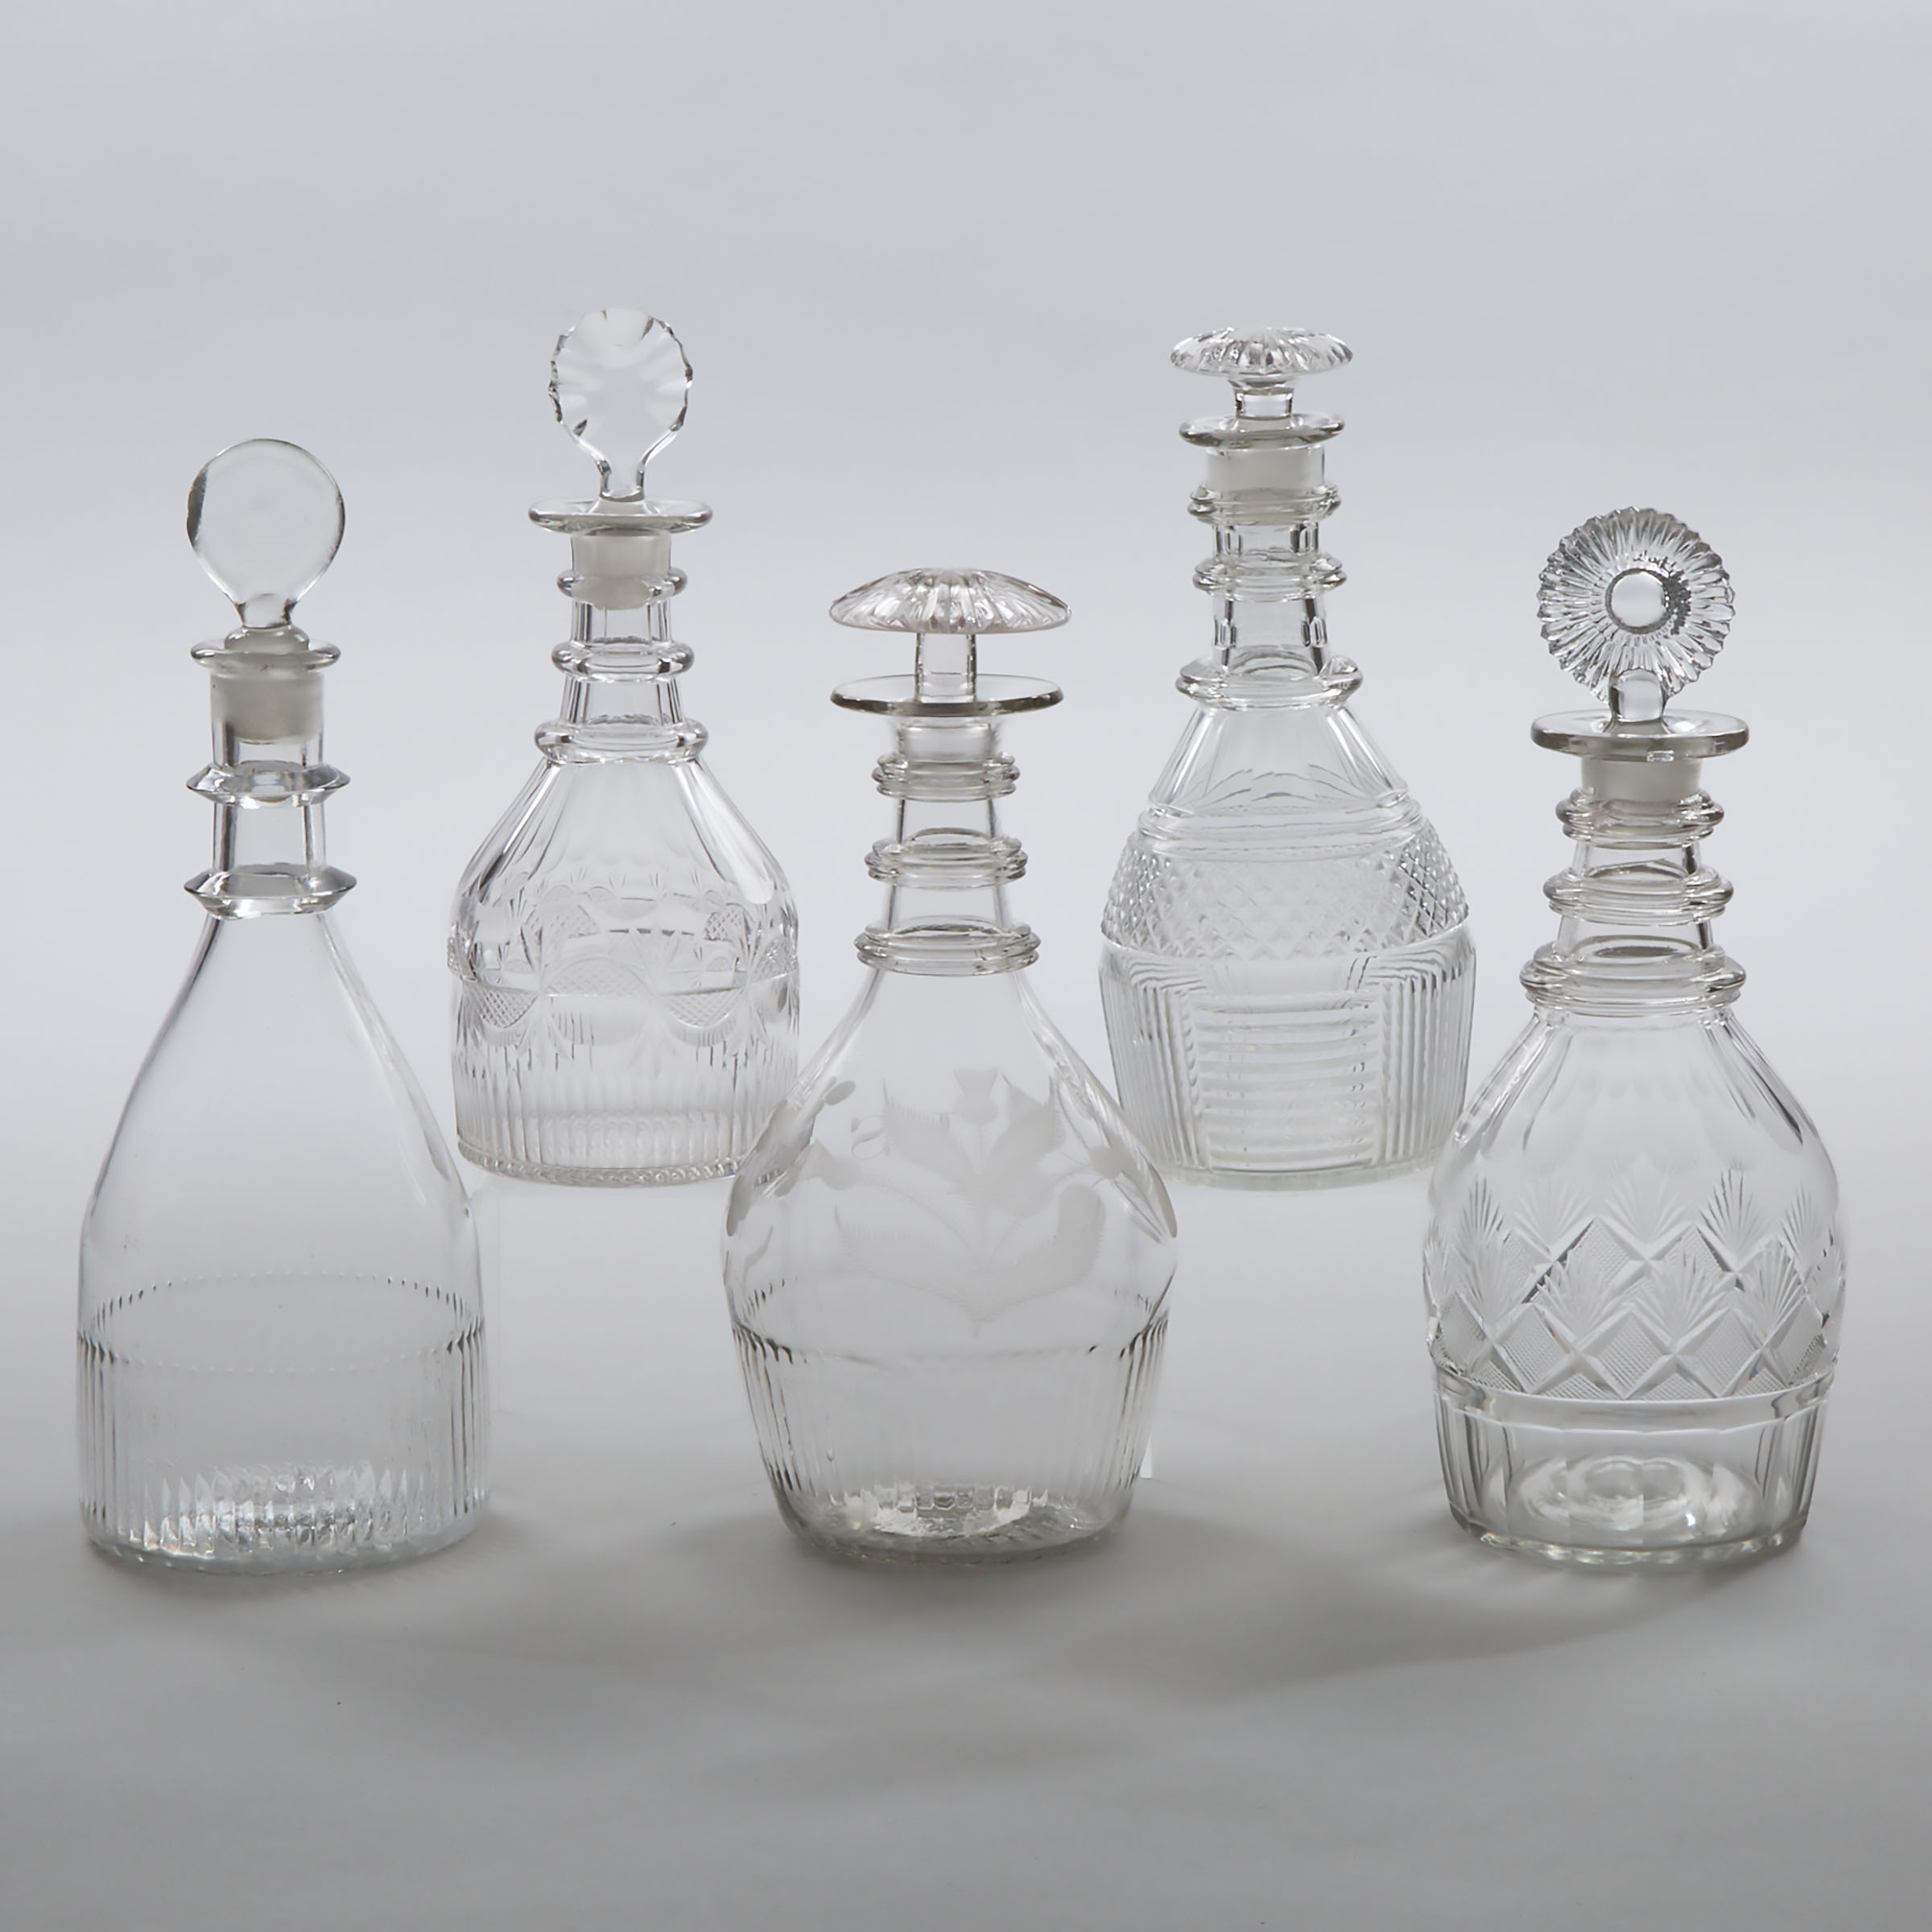 Five English Cut Glass Decanters, 19th century